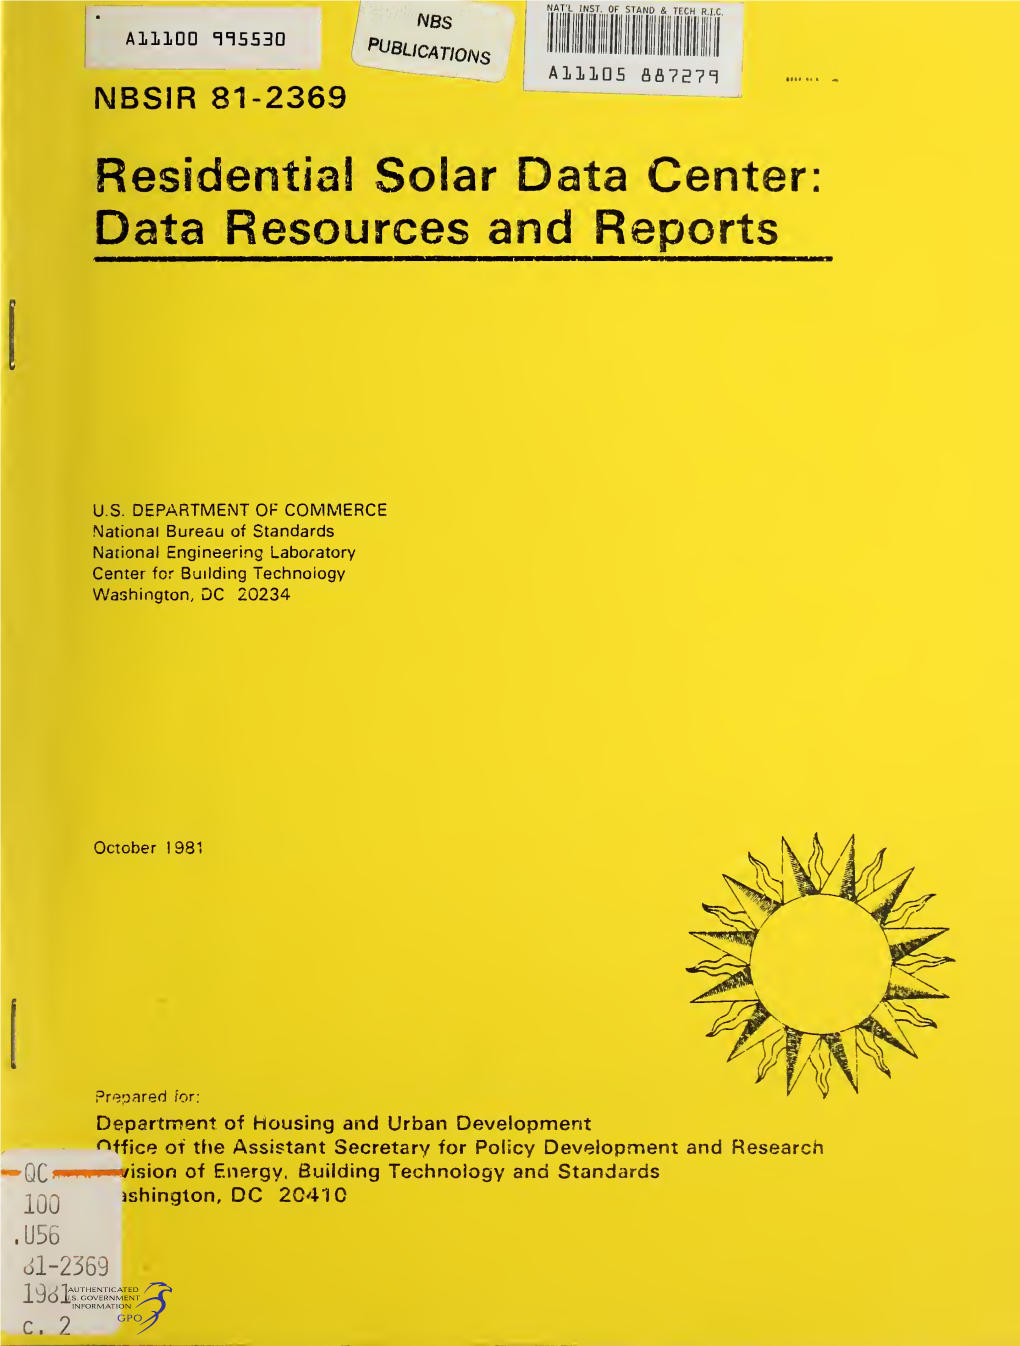 Residential Solar Data Center: Data Resources and Reports